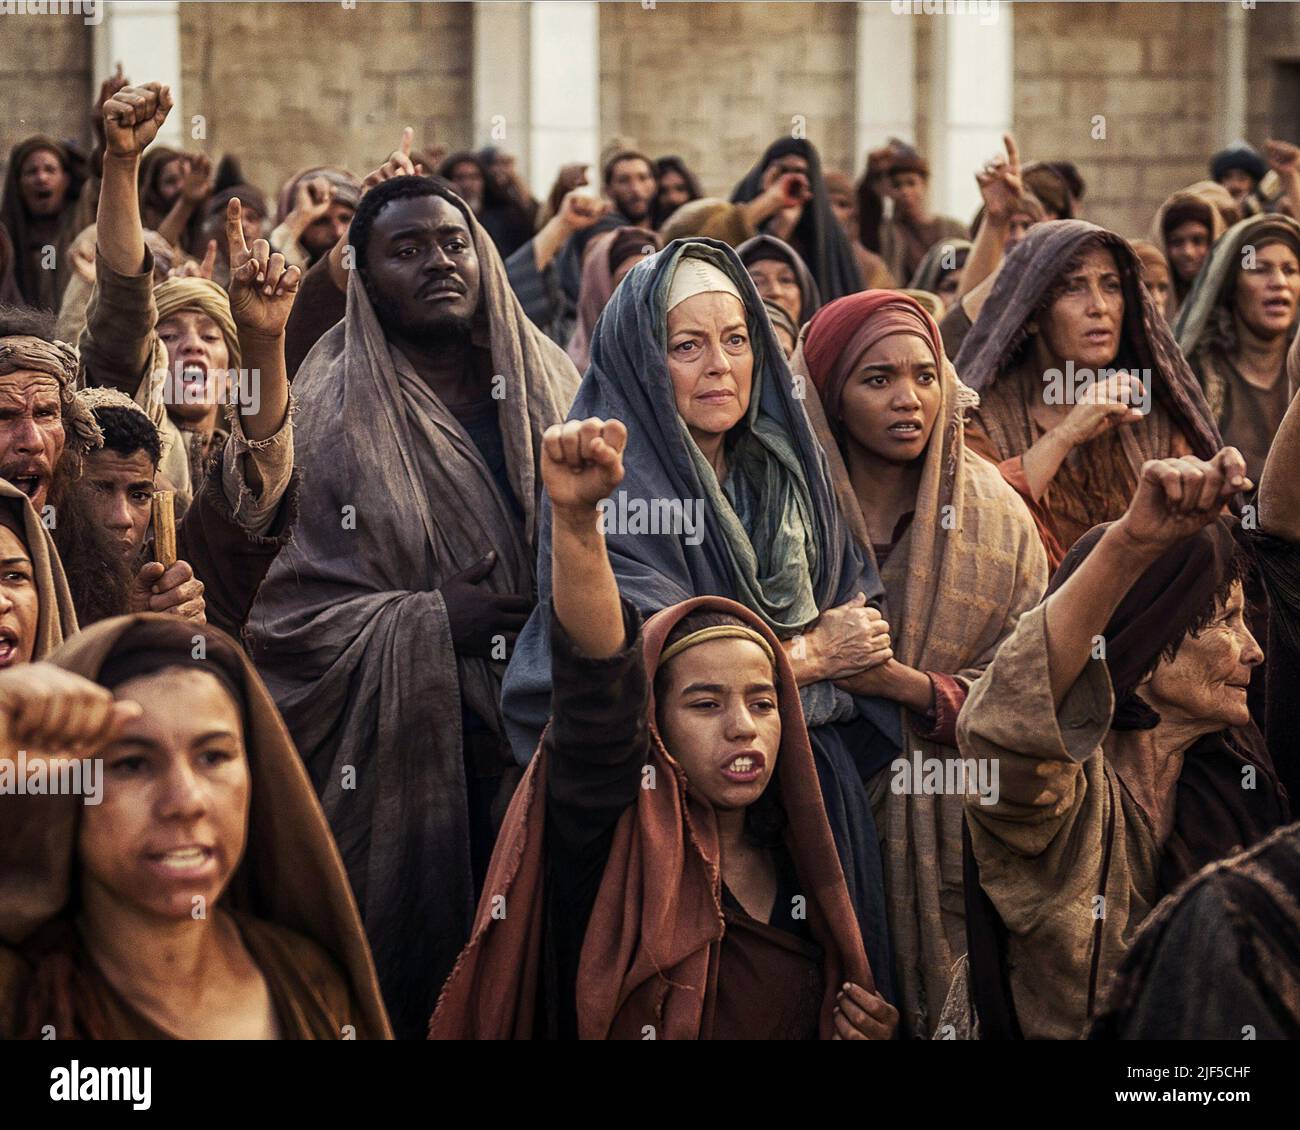 CEESAY,SCACCHI,CHUNG, A.D. THE BIBLE CONTINUES, 2015 Stock Photo